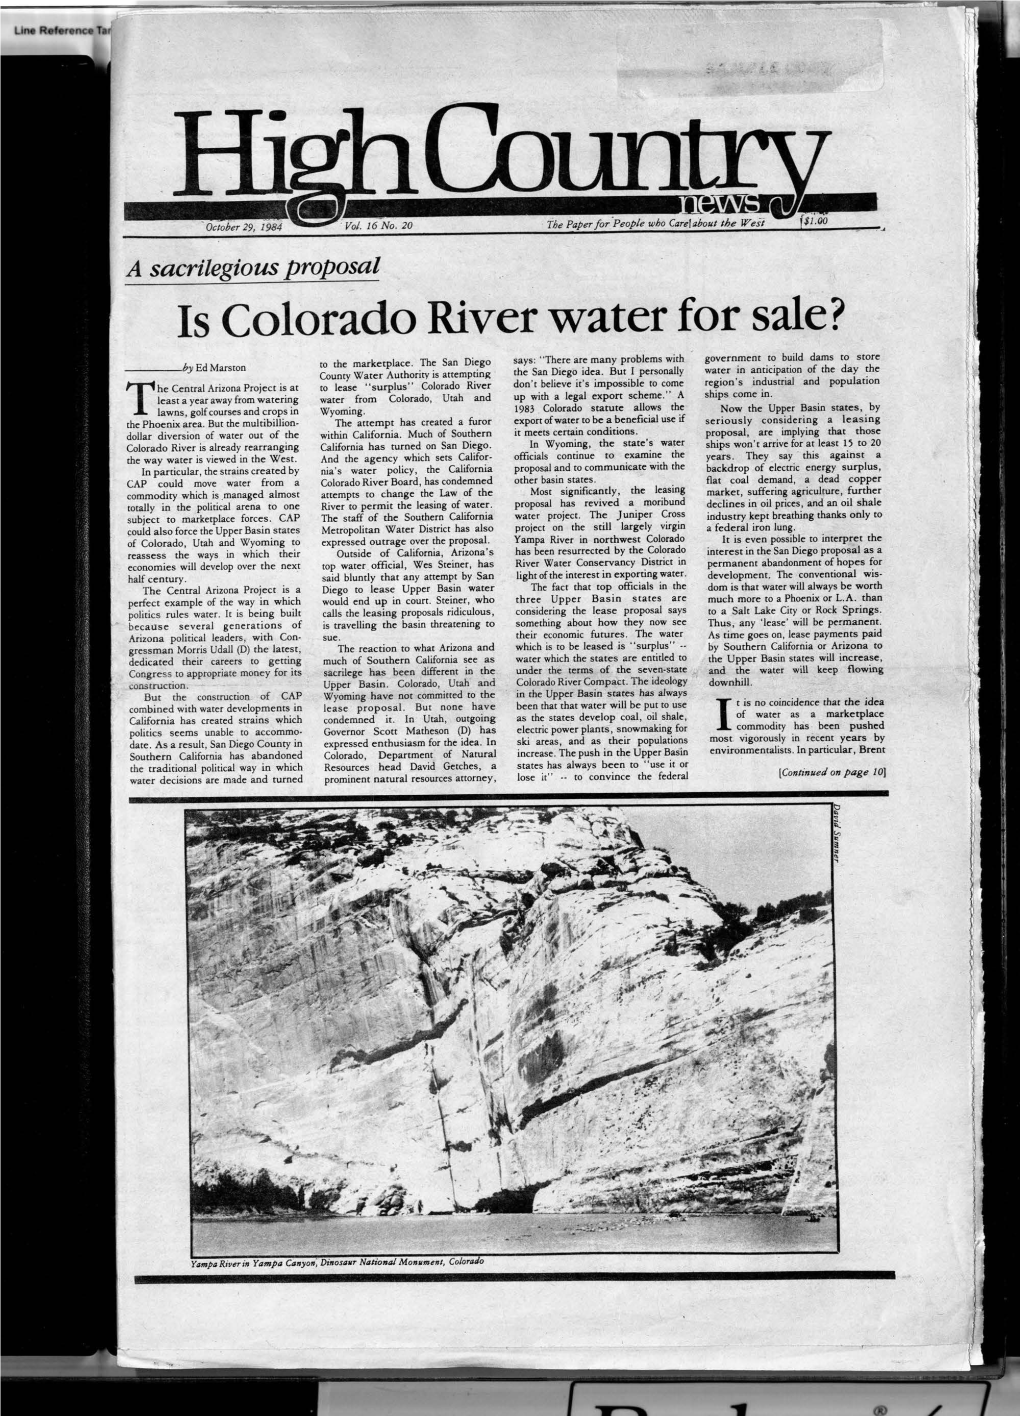 High Country News Vol. 16, 20, Oct. 29, 1984